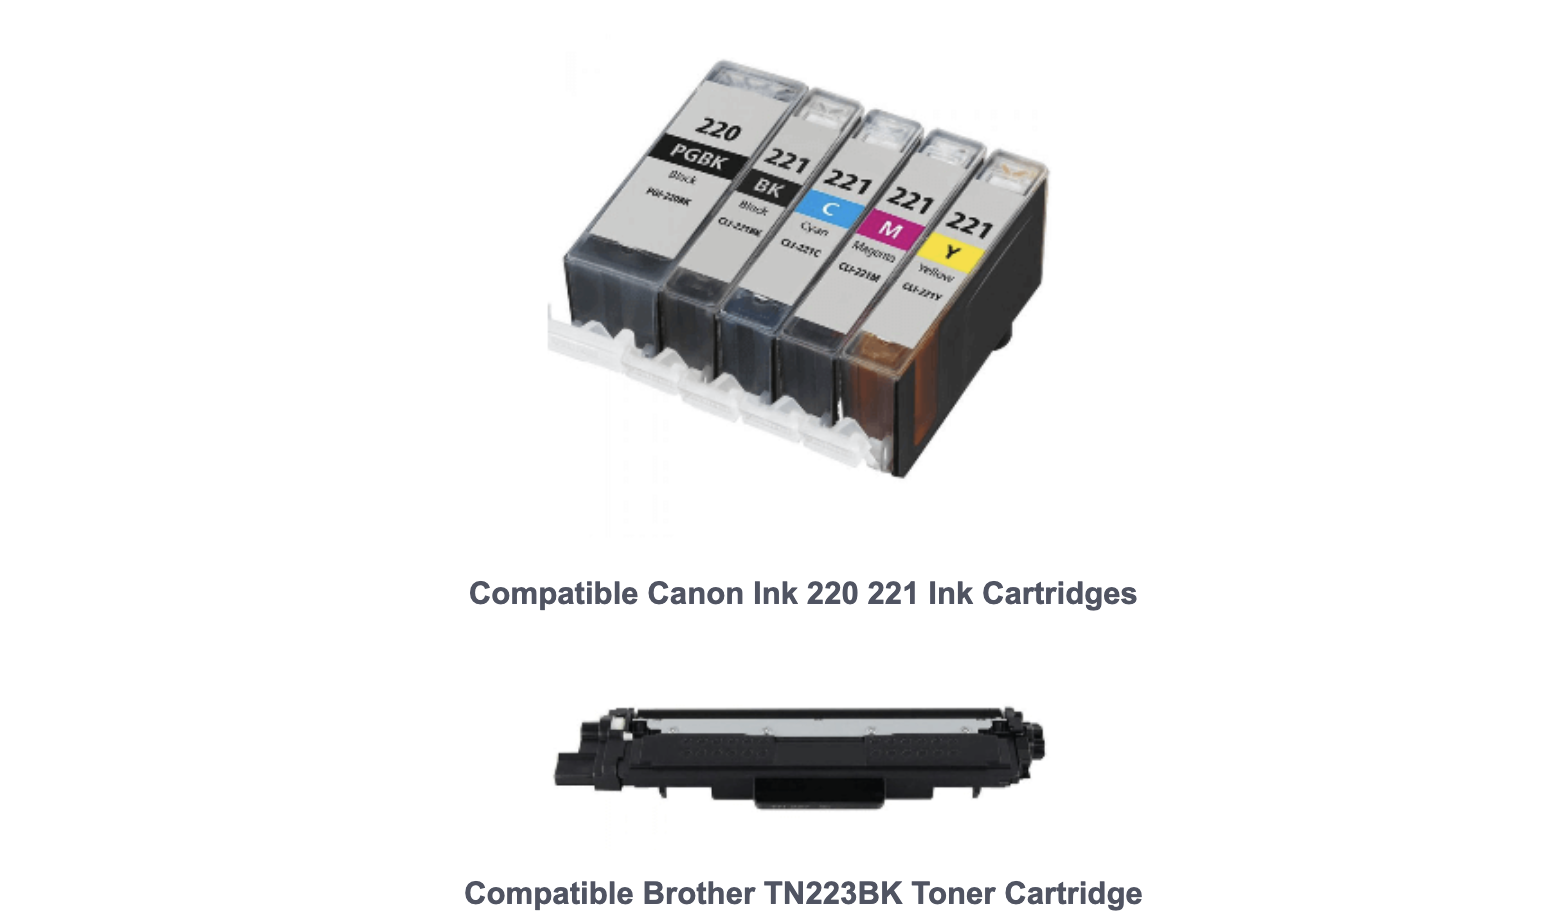 compatible ink and toner cartridges